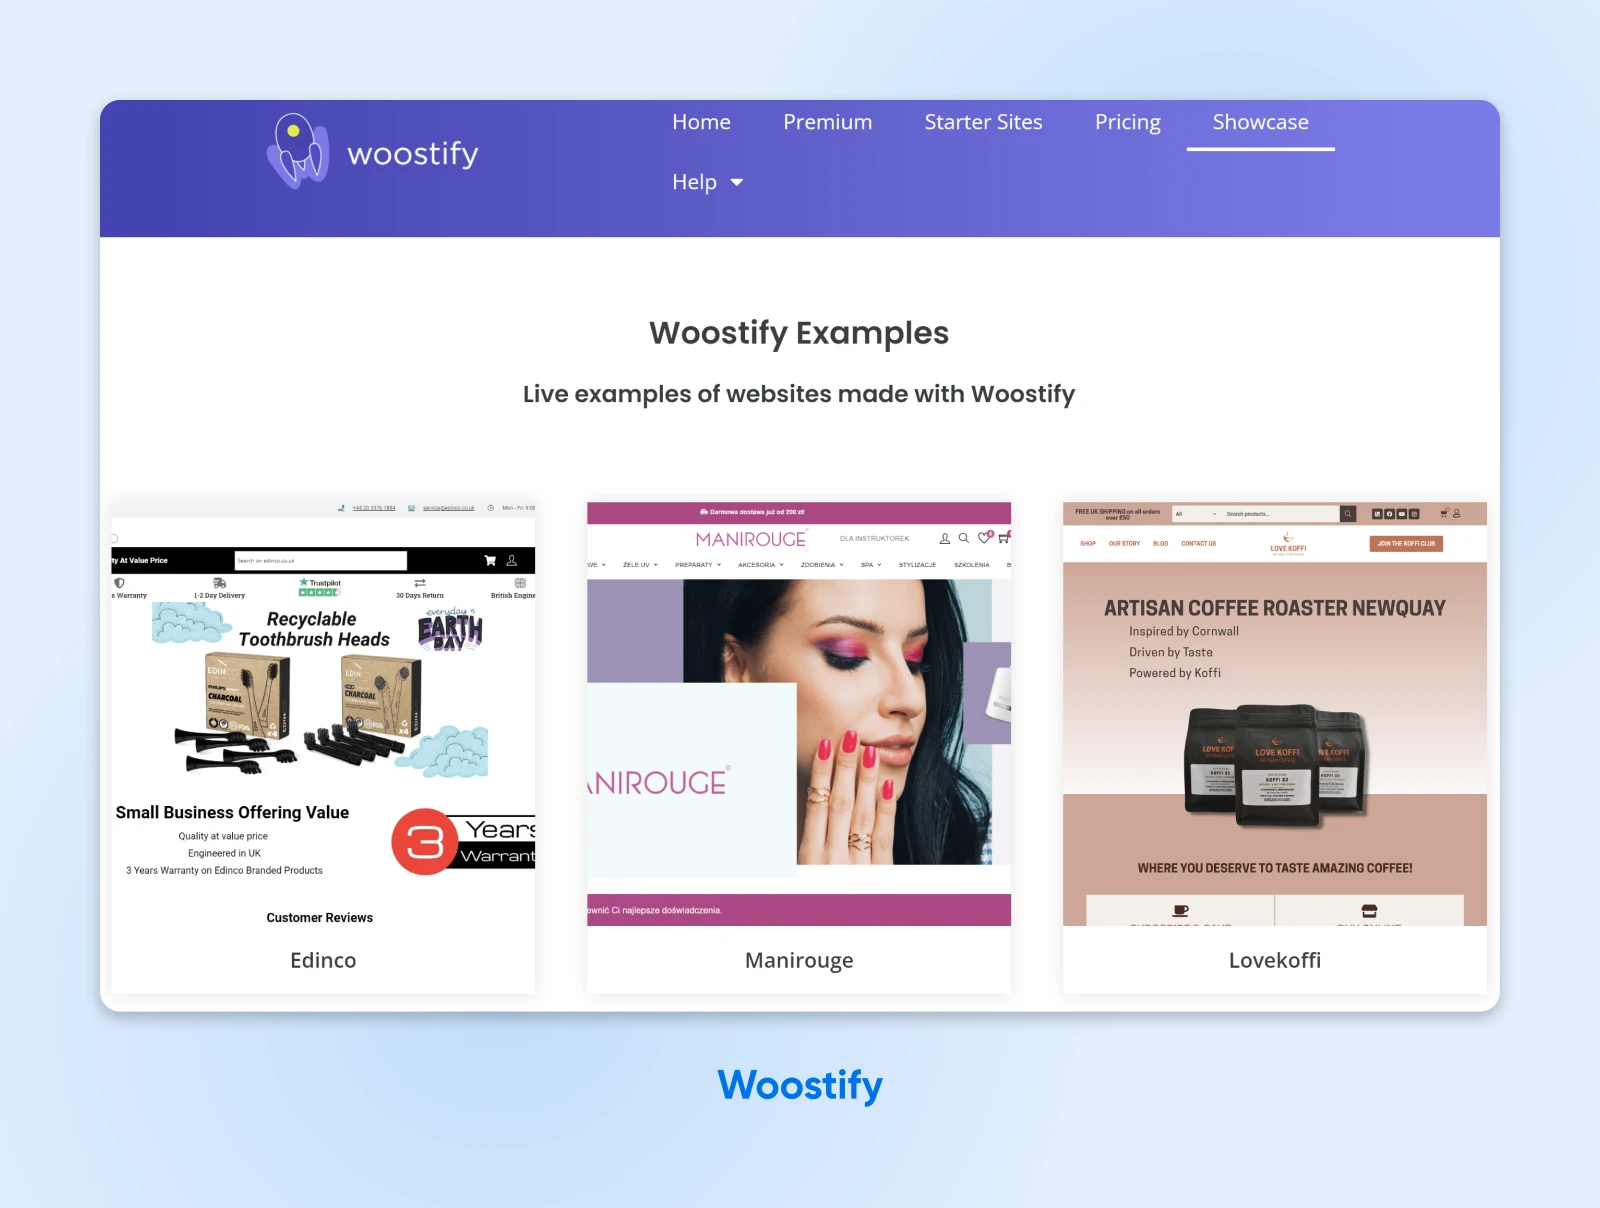 Woostify webpage showing live examples of three websites built using the WooCommerce theme.